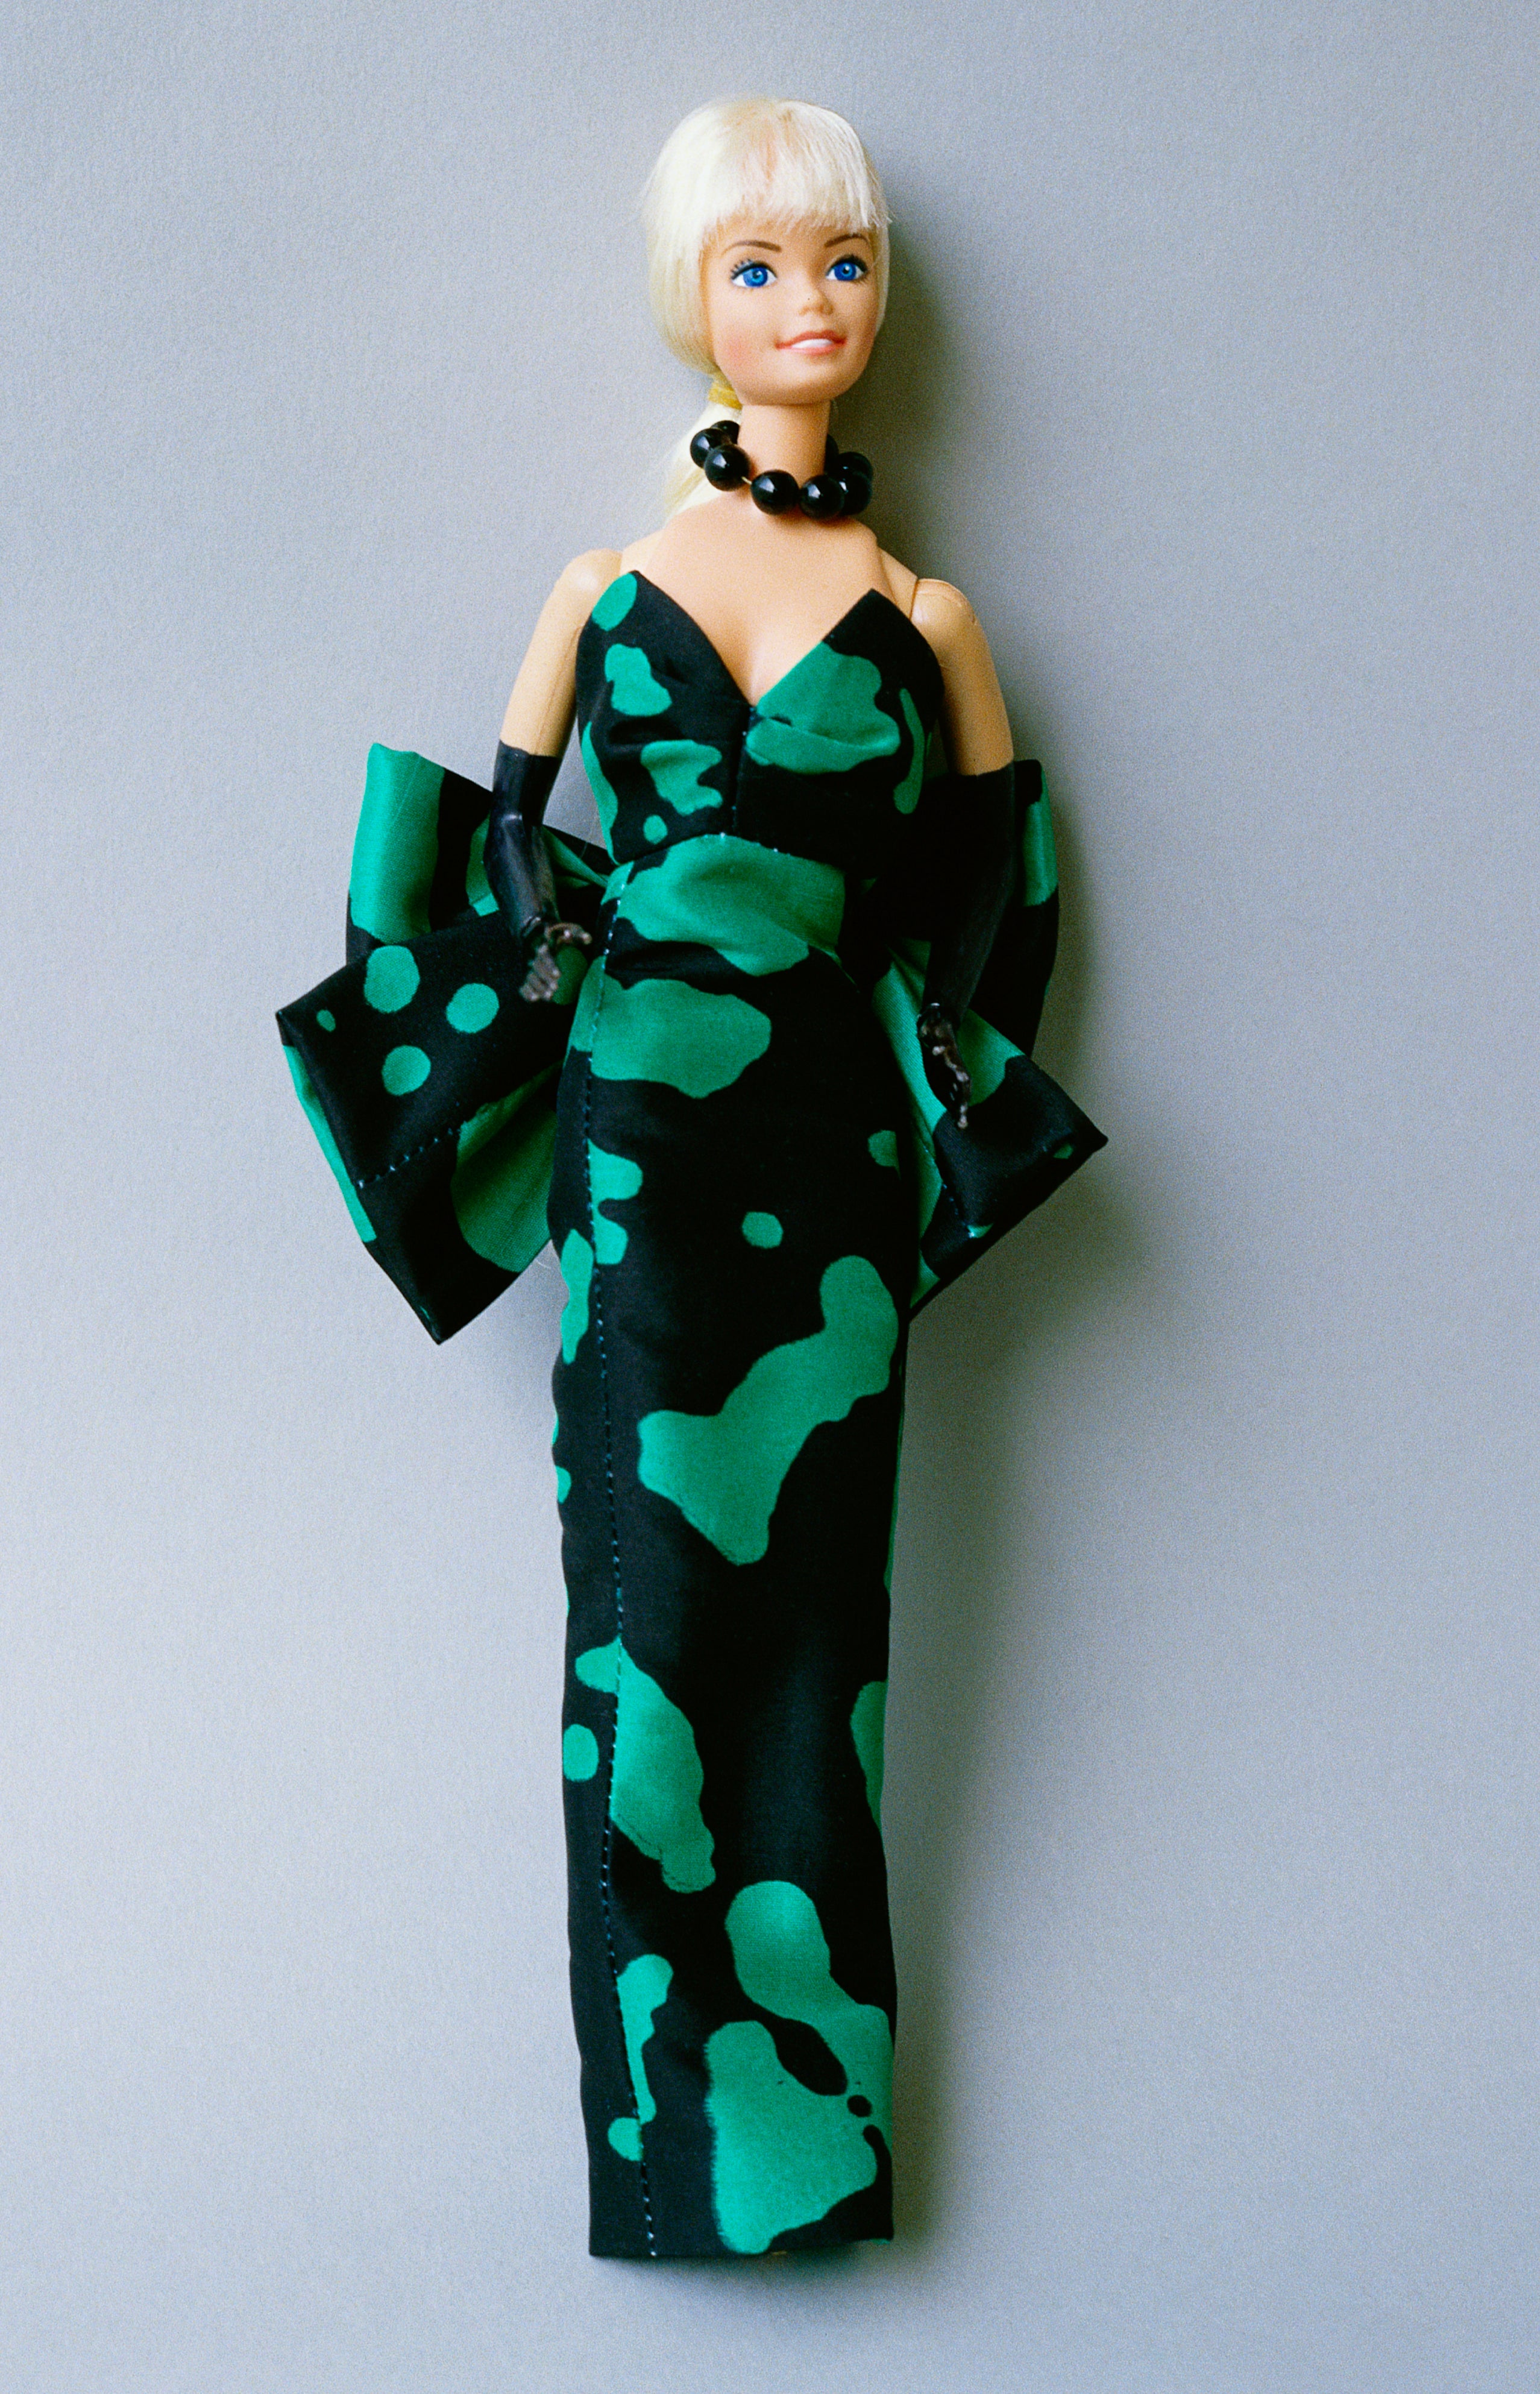 Barbie doll from the collection of Barbie aficionado Billy Boy wears an outfit designed by Christian Dior